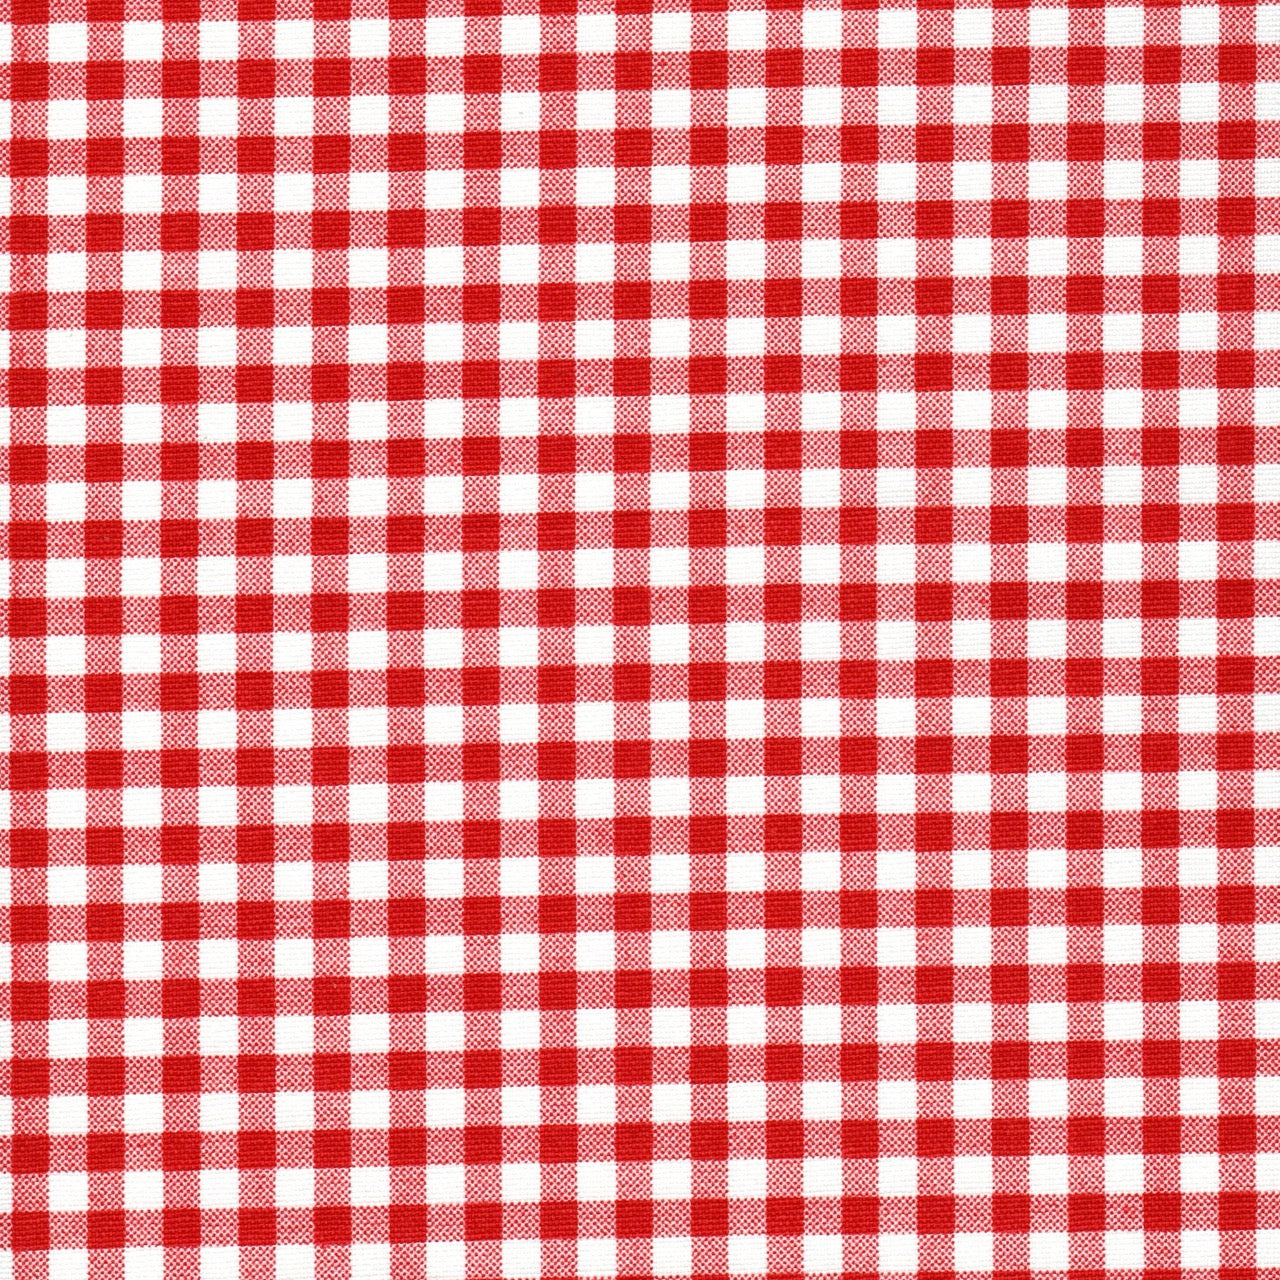 Tie-up Valance in Lipstick Red Large Gingham Check on White